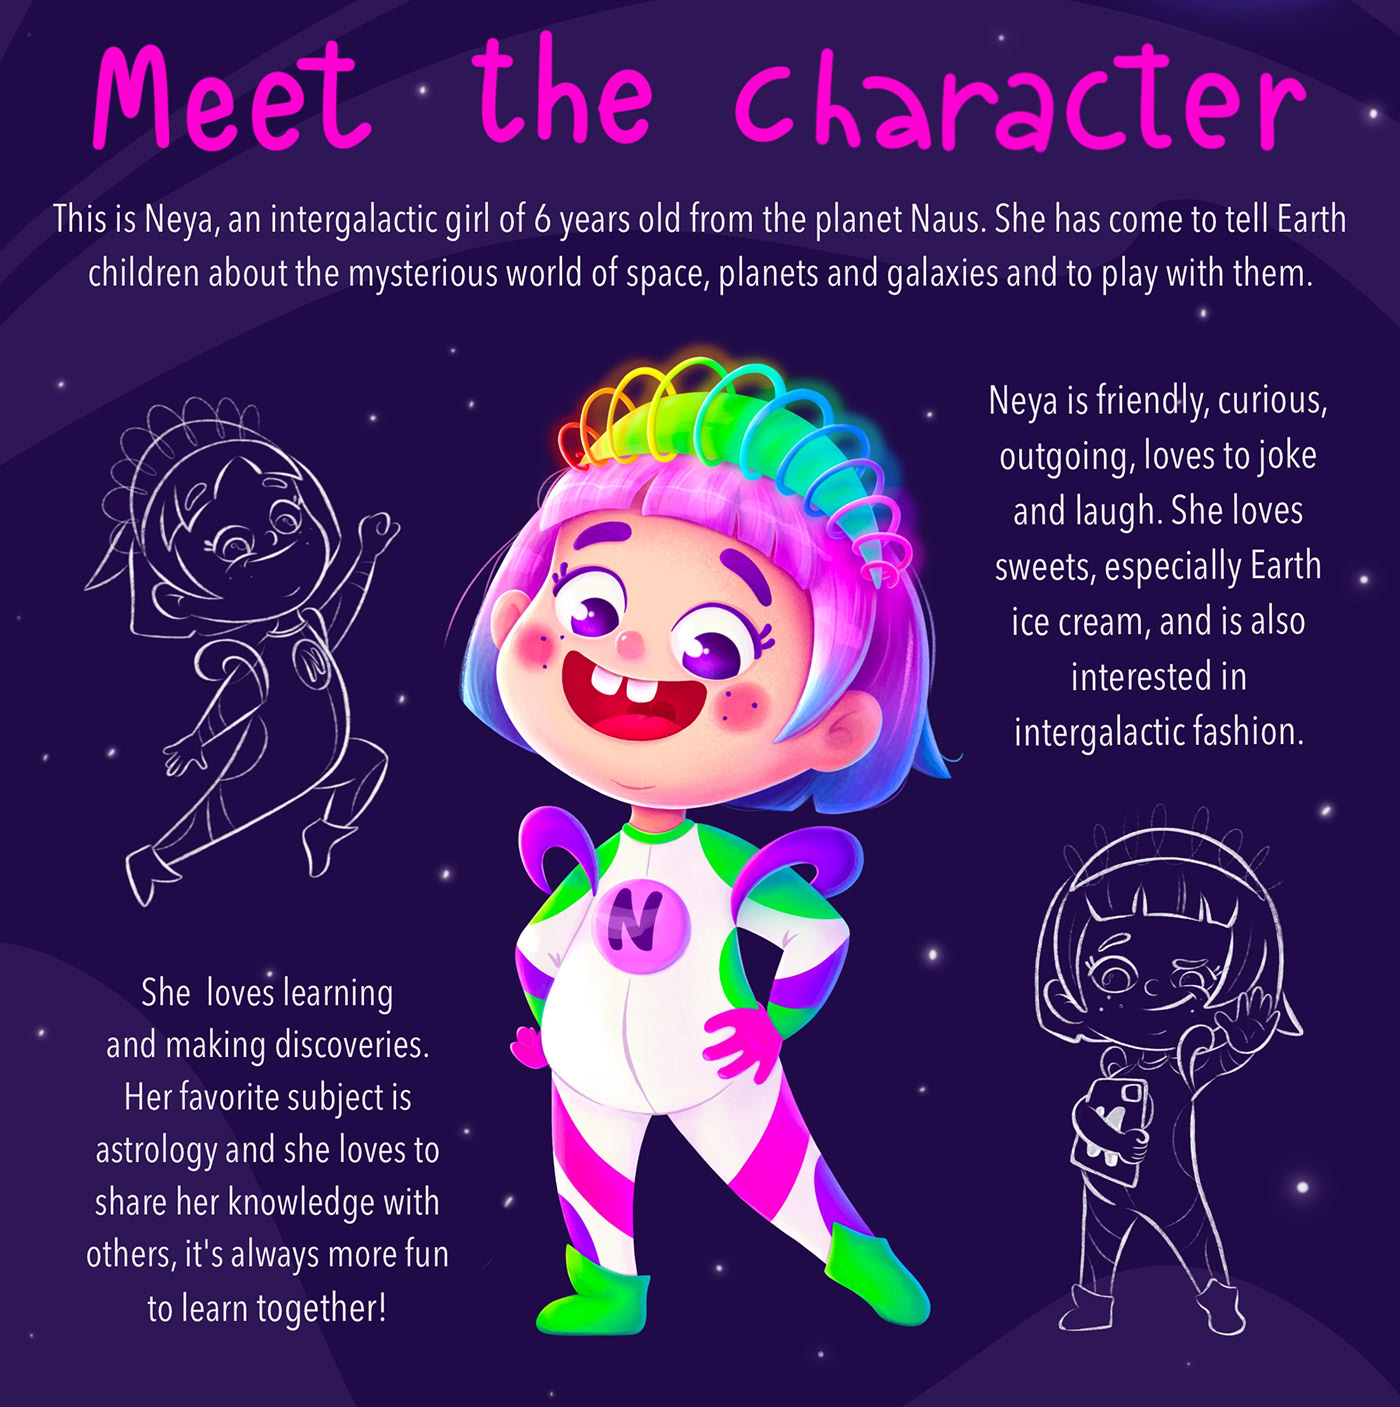 Meet the character